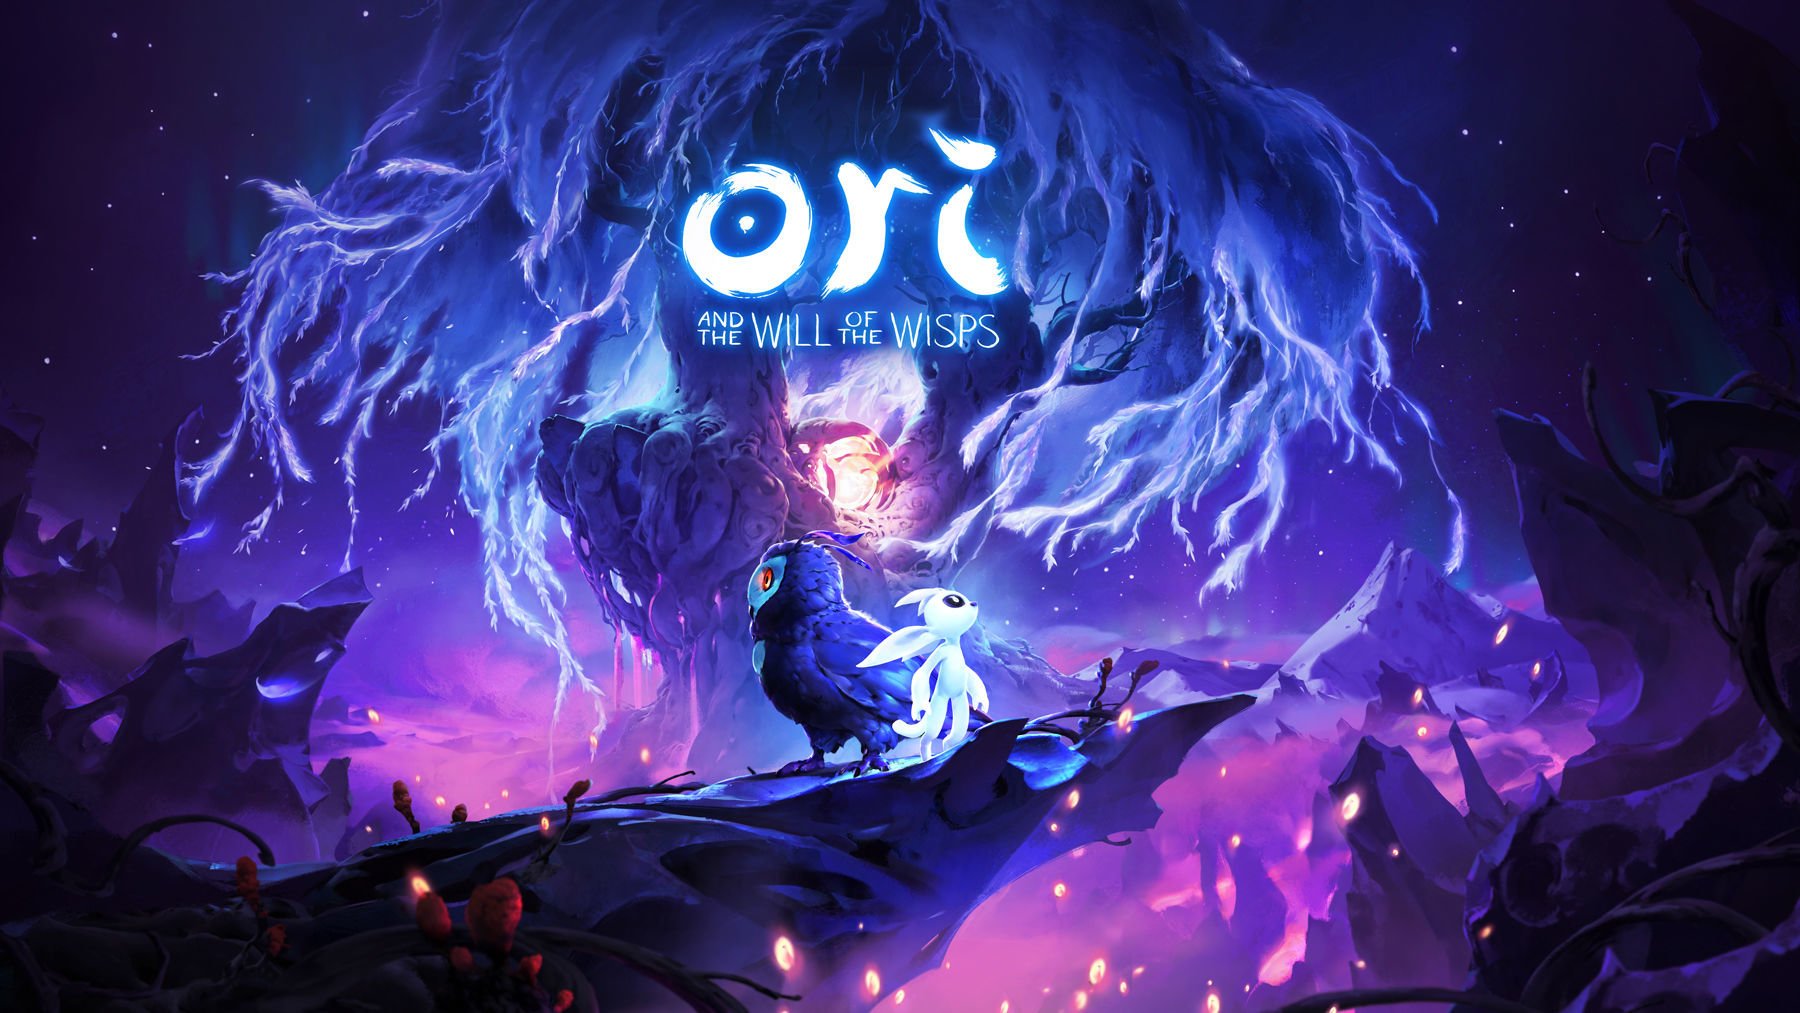 Ori and the will of the wisps na bgs 2019 | dims 2 | married games tencent | tencent | ori and the will of the wisps